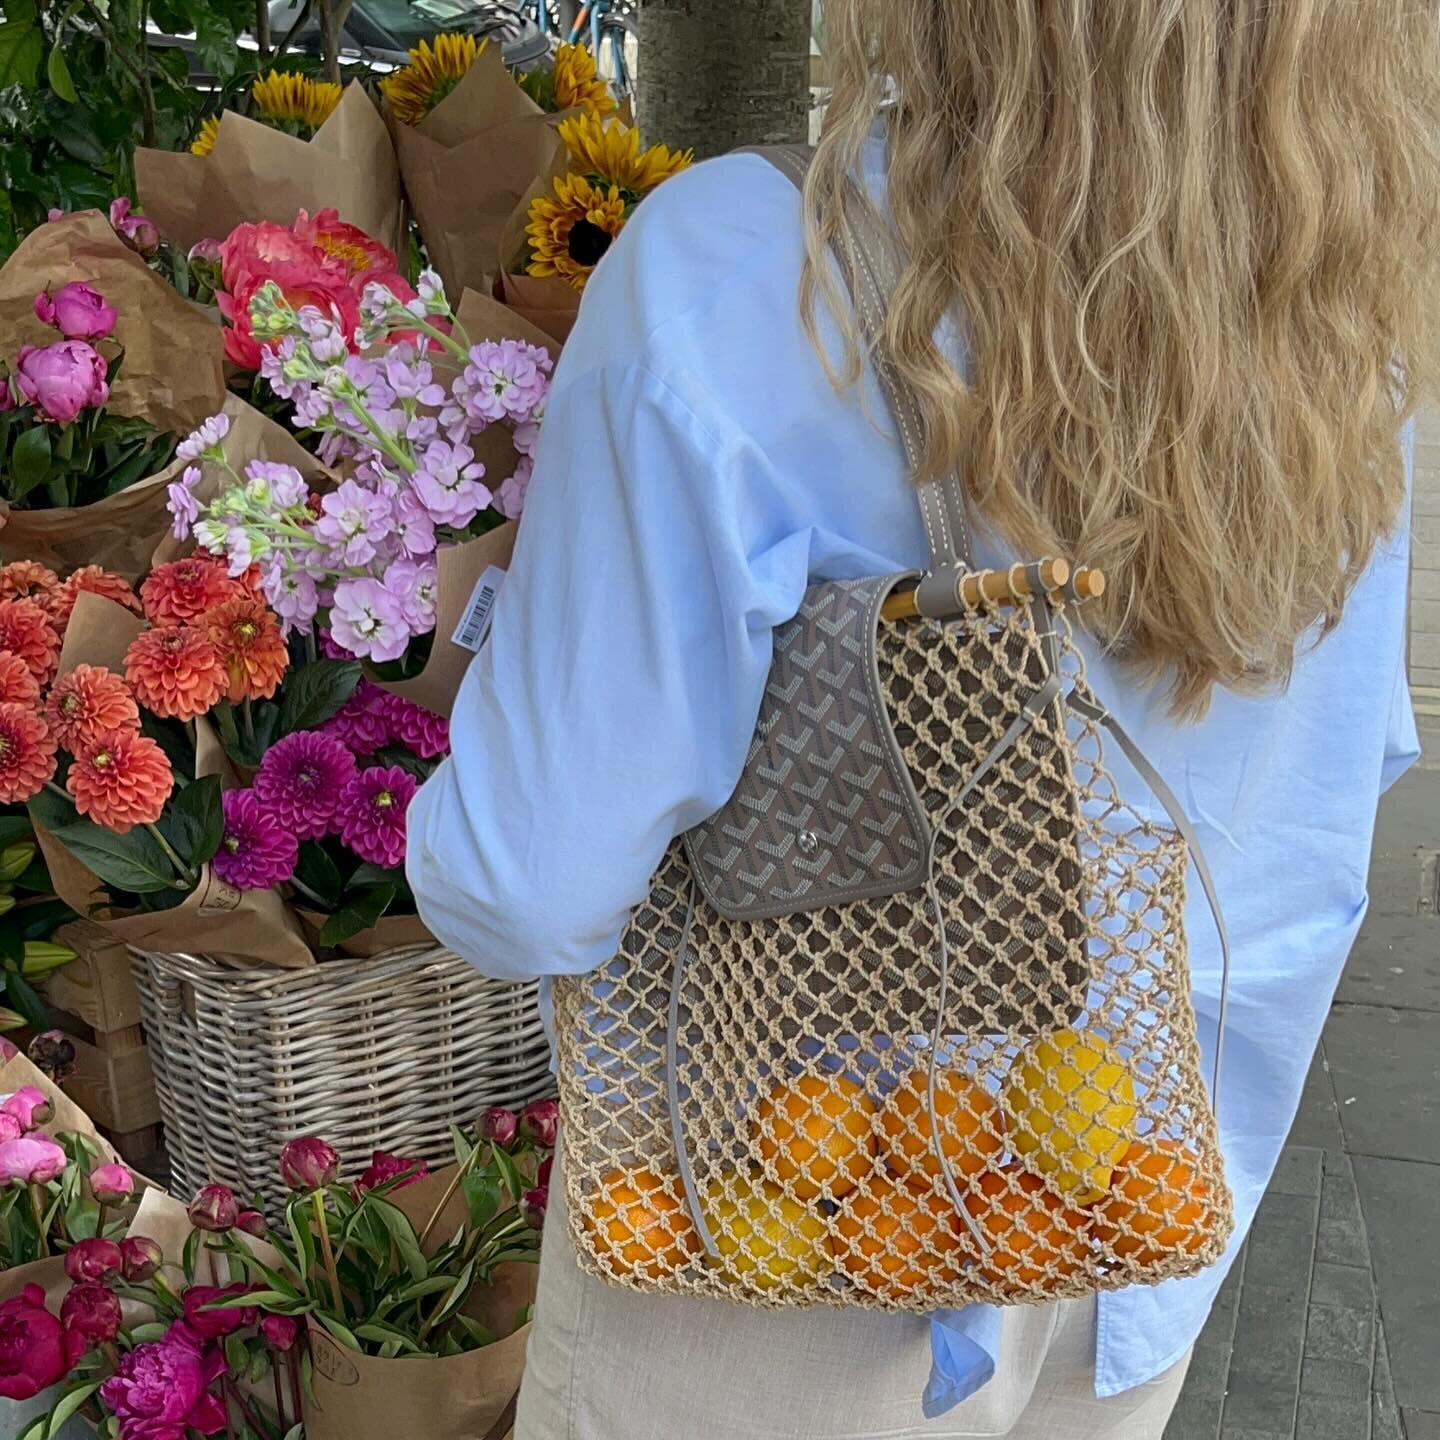 It&rsquo;s time to plan your summer wardrobe!☀️🍊👜🩵🌸

Just a reminder that our expert team of personal shopper is here to help plan outfits for your vacation or source and secure anything from your wish-list 🩷

Get yours by messaging through our 